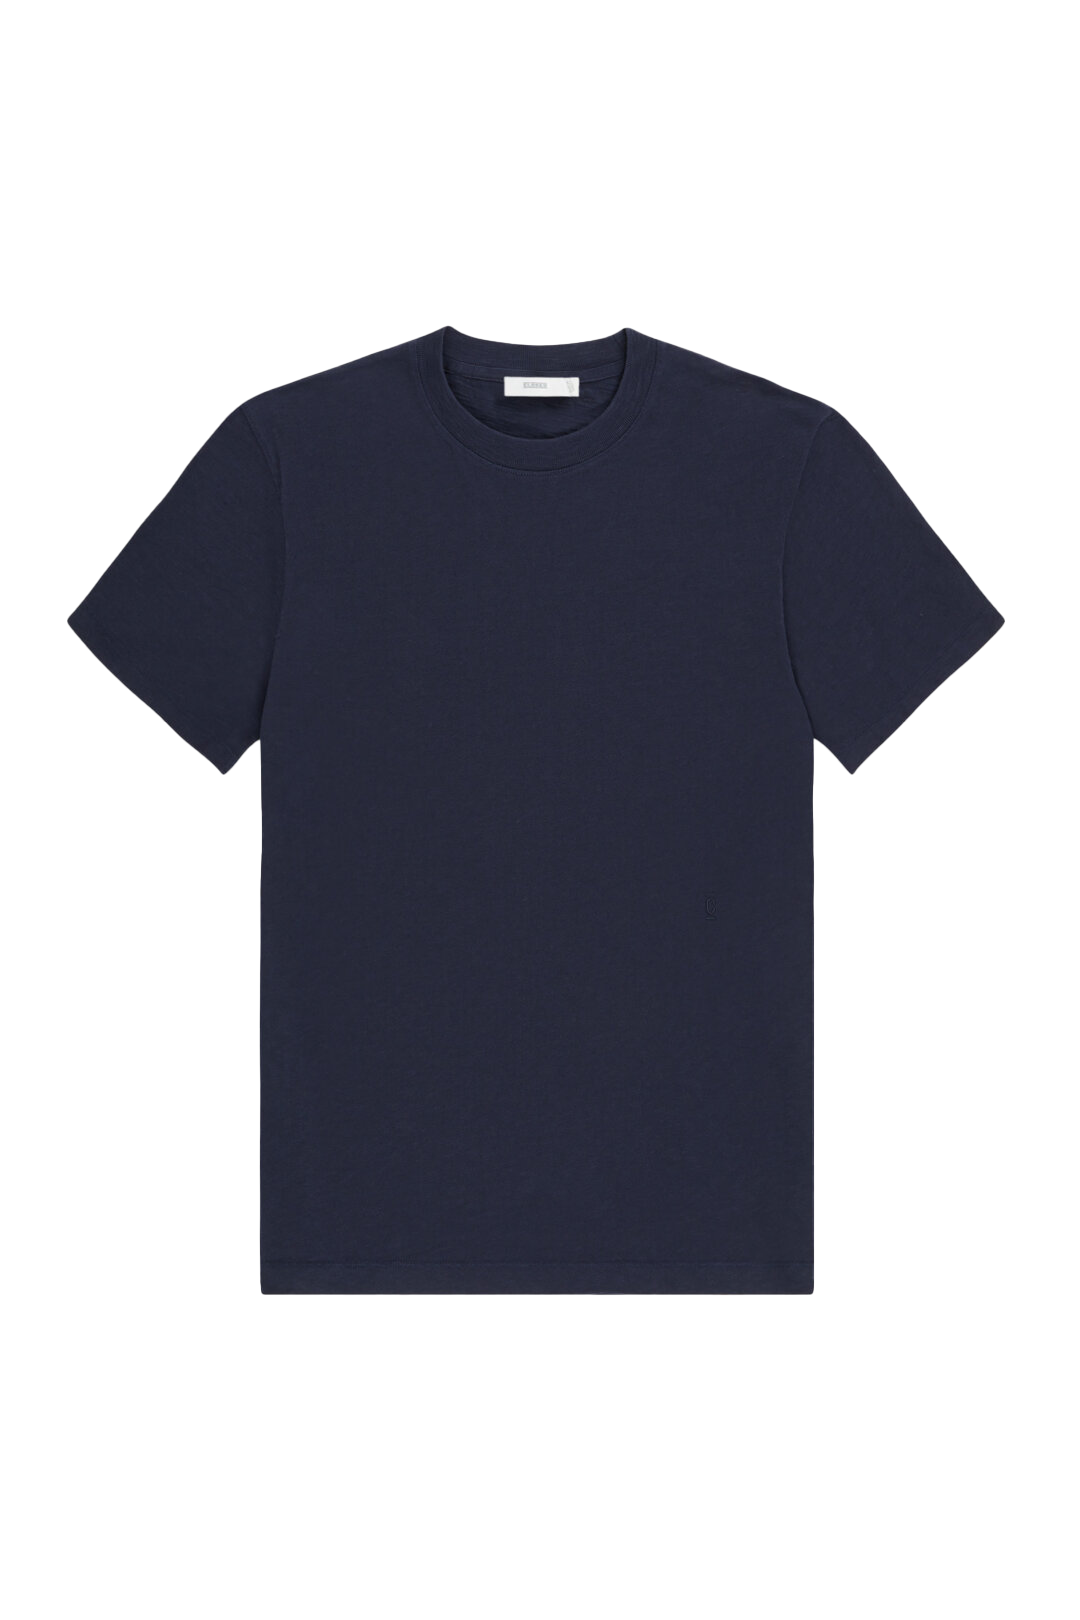 Closed - Relaxed T-Shirt